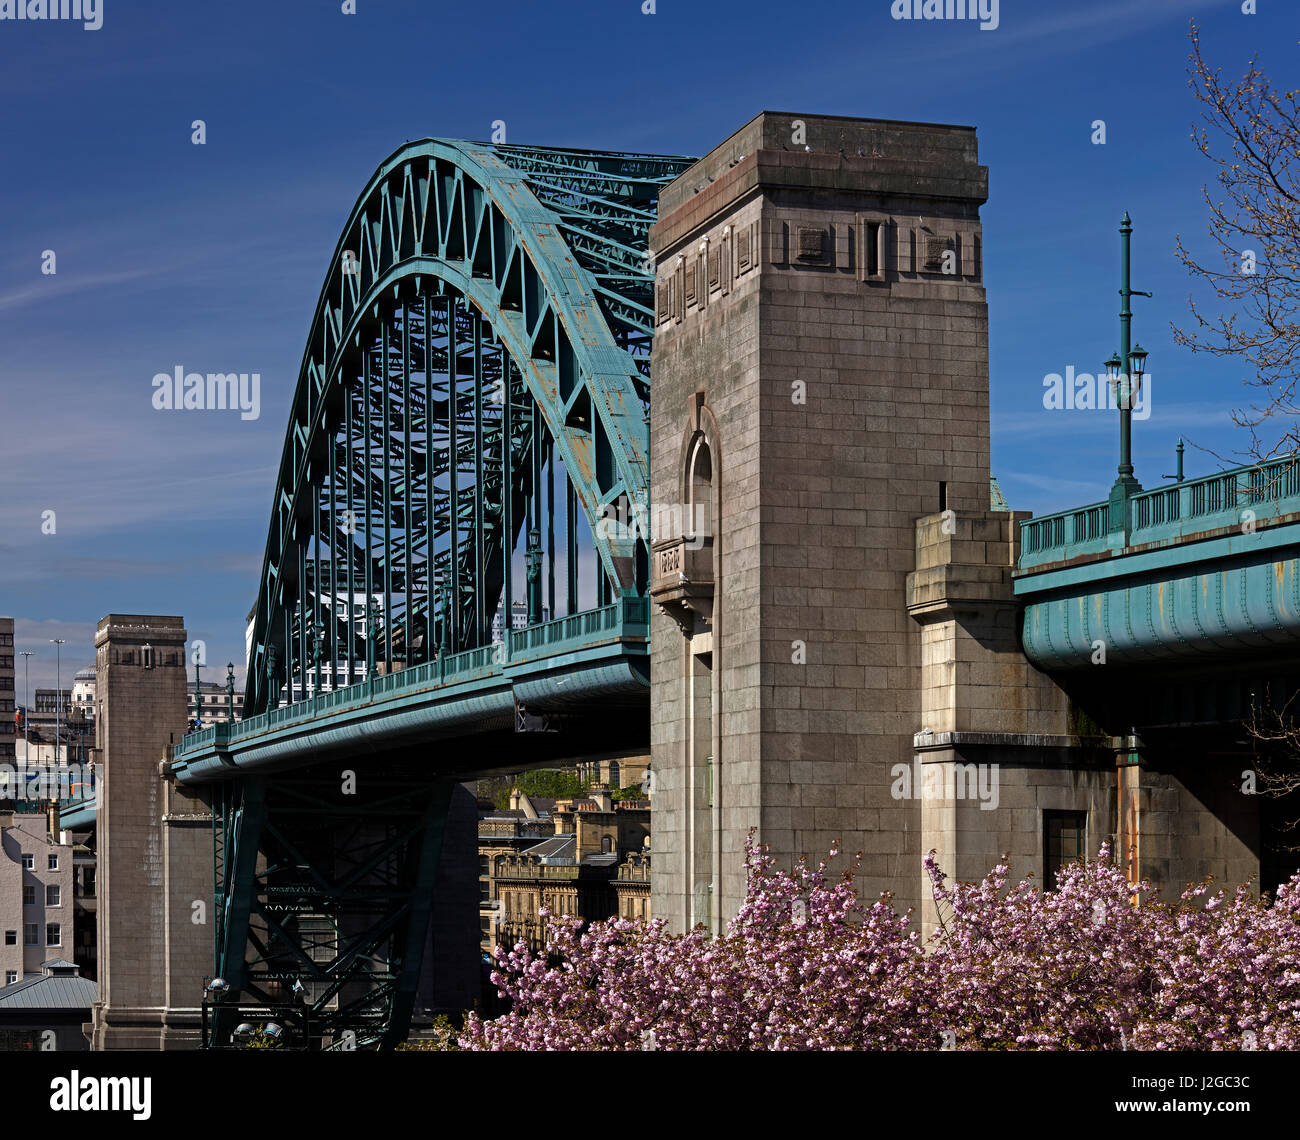 A daytime view of the Tyne Bridge against a summer-time blue sky in Newcastle Upon Tyne, North East England, United Kingdom Stock Photo